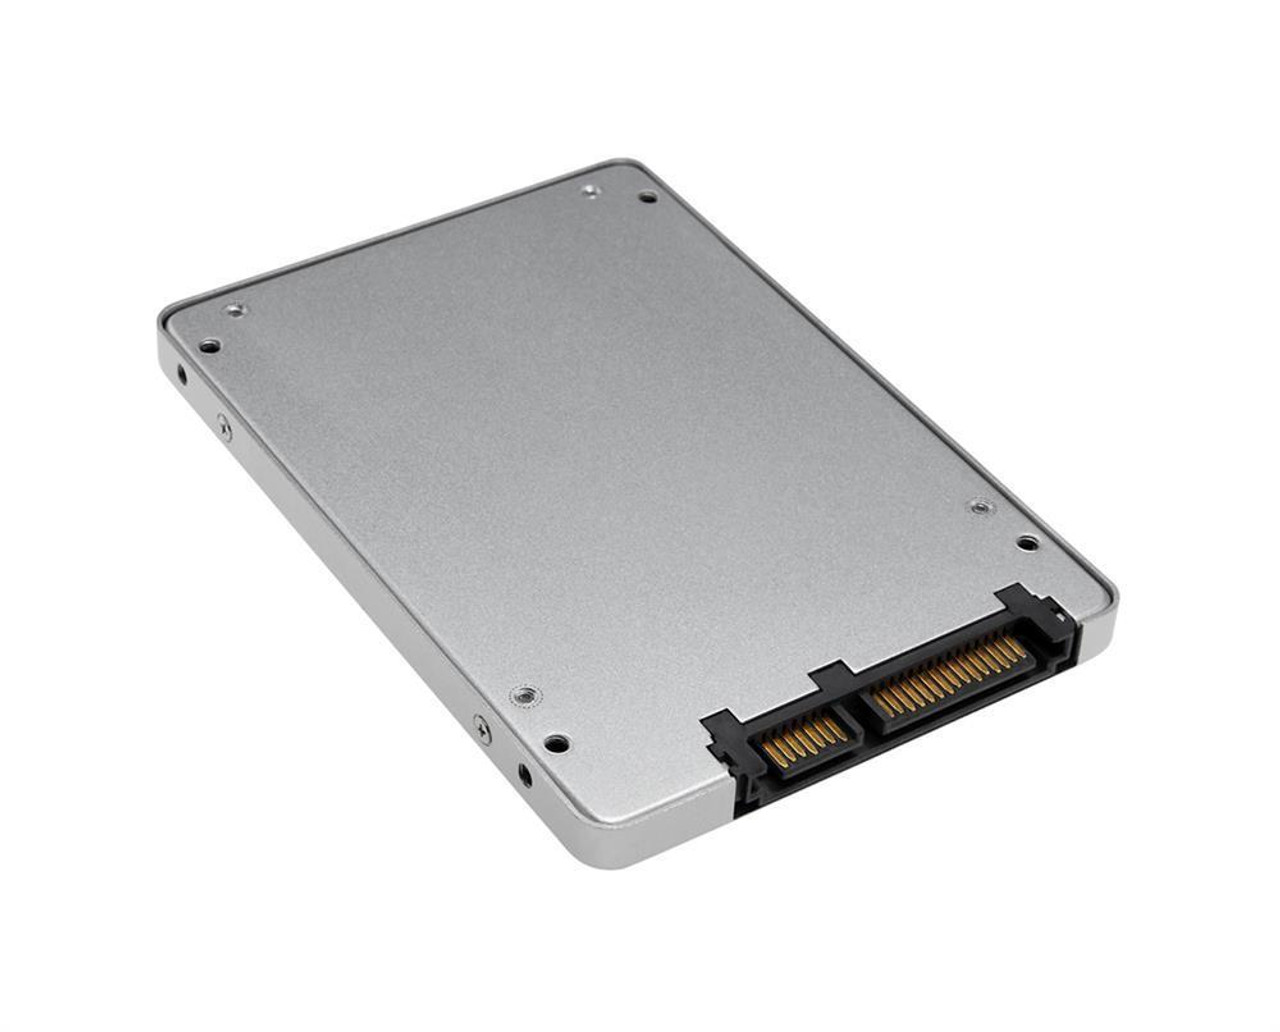 03B0100130300 ASUS 512GB SATA 6Gbps 2.5-inch Internal Solid State Drive (SSD) for UX31A